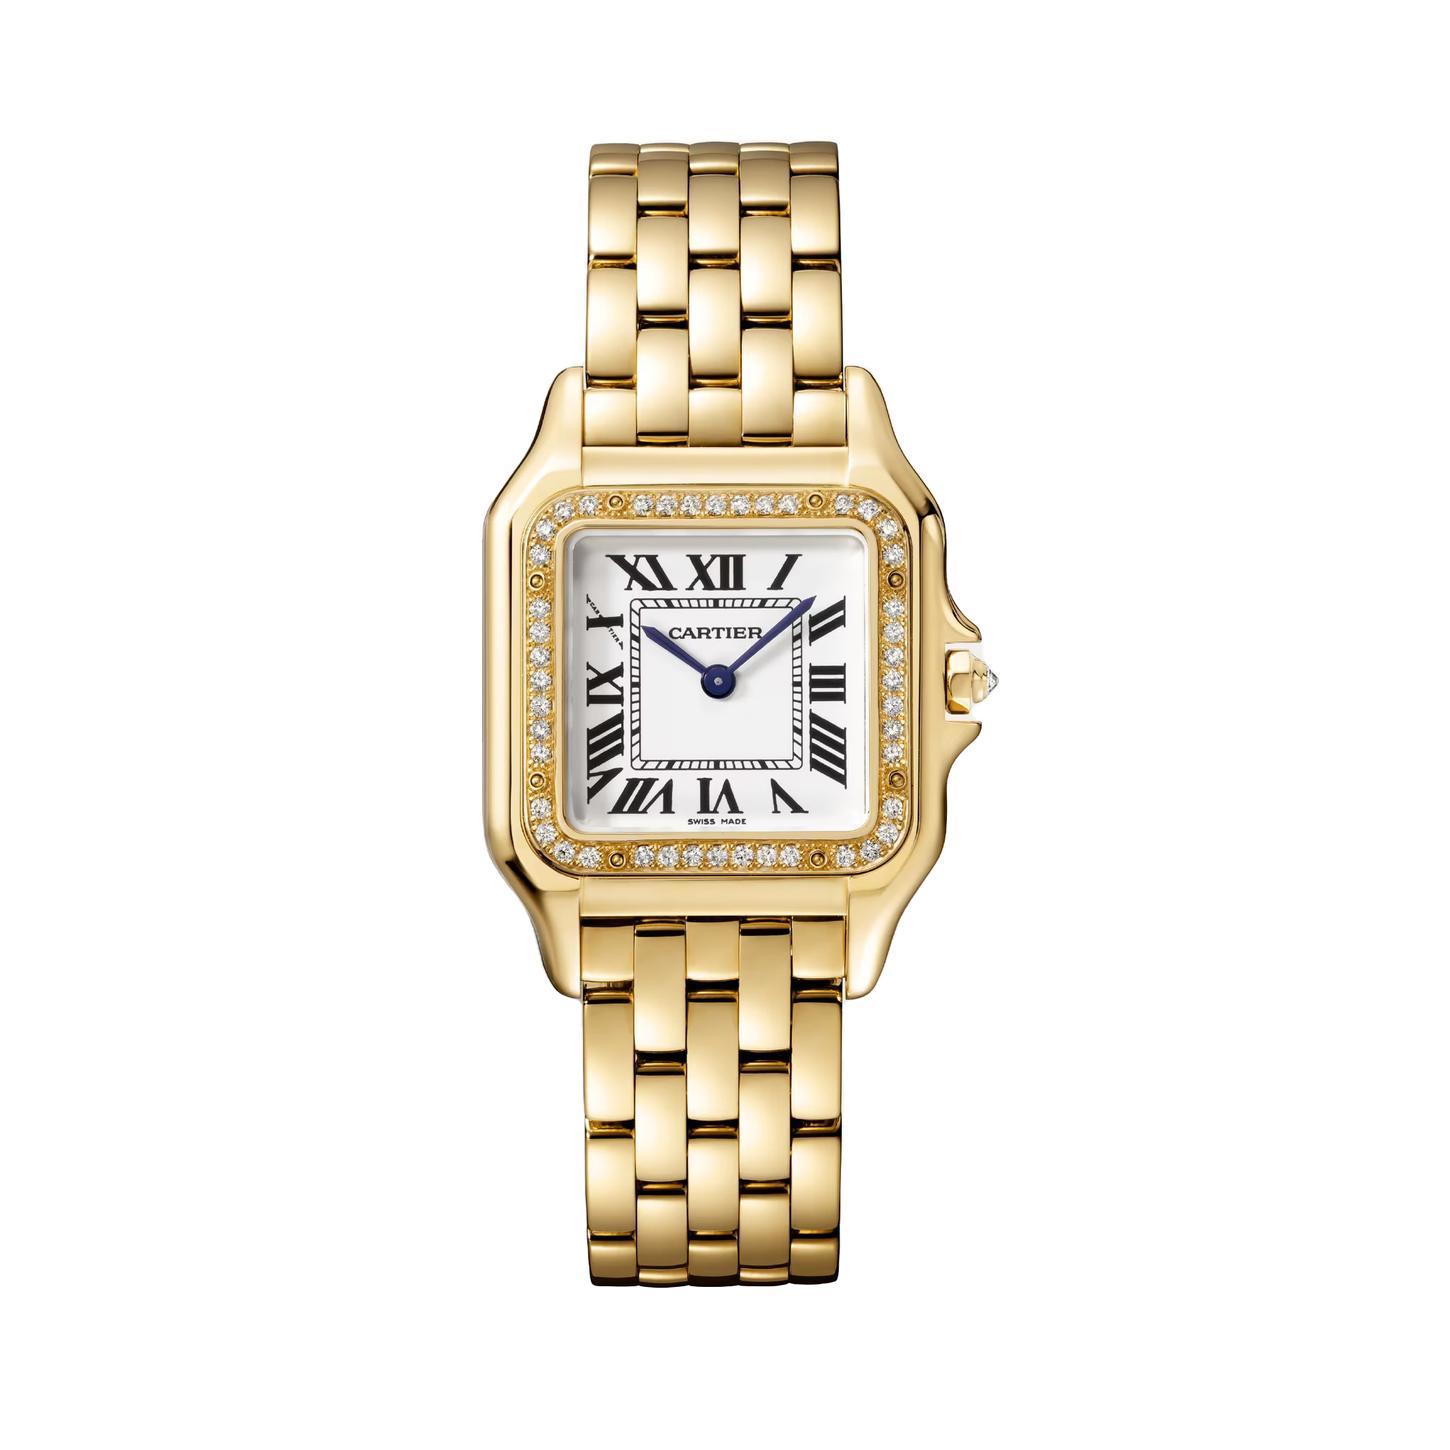 Panthere de Cartier Watch in Yellow Gold with Diamonds, size medium 5